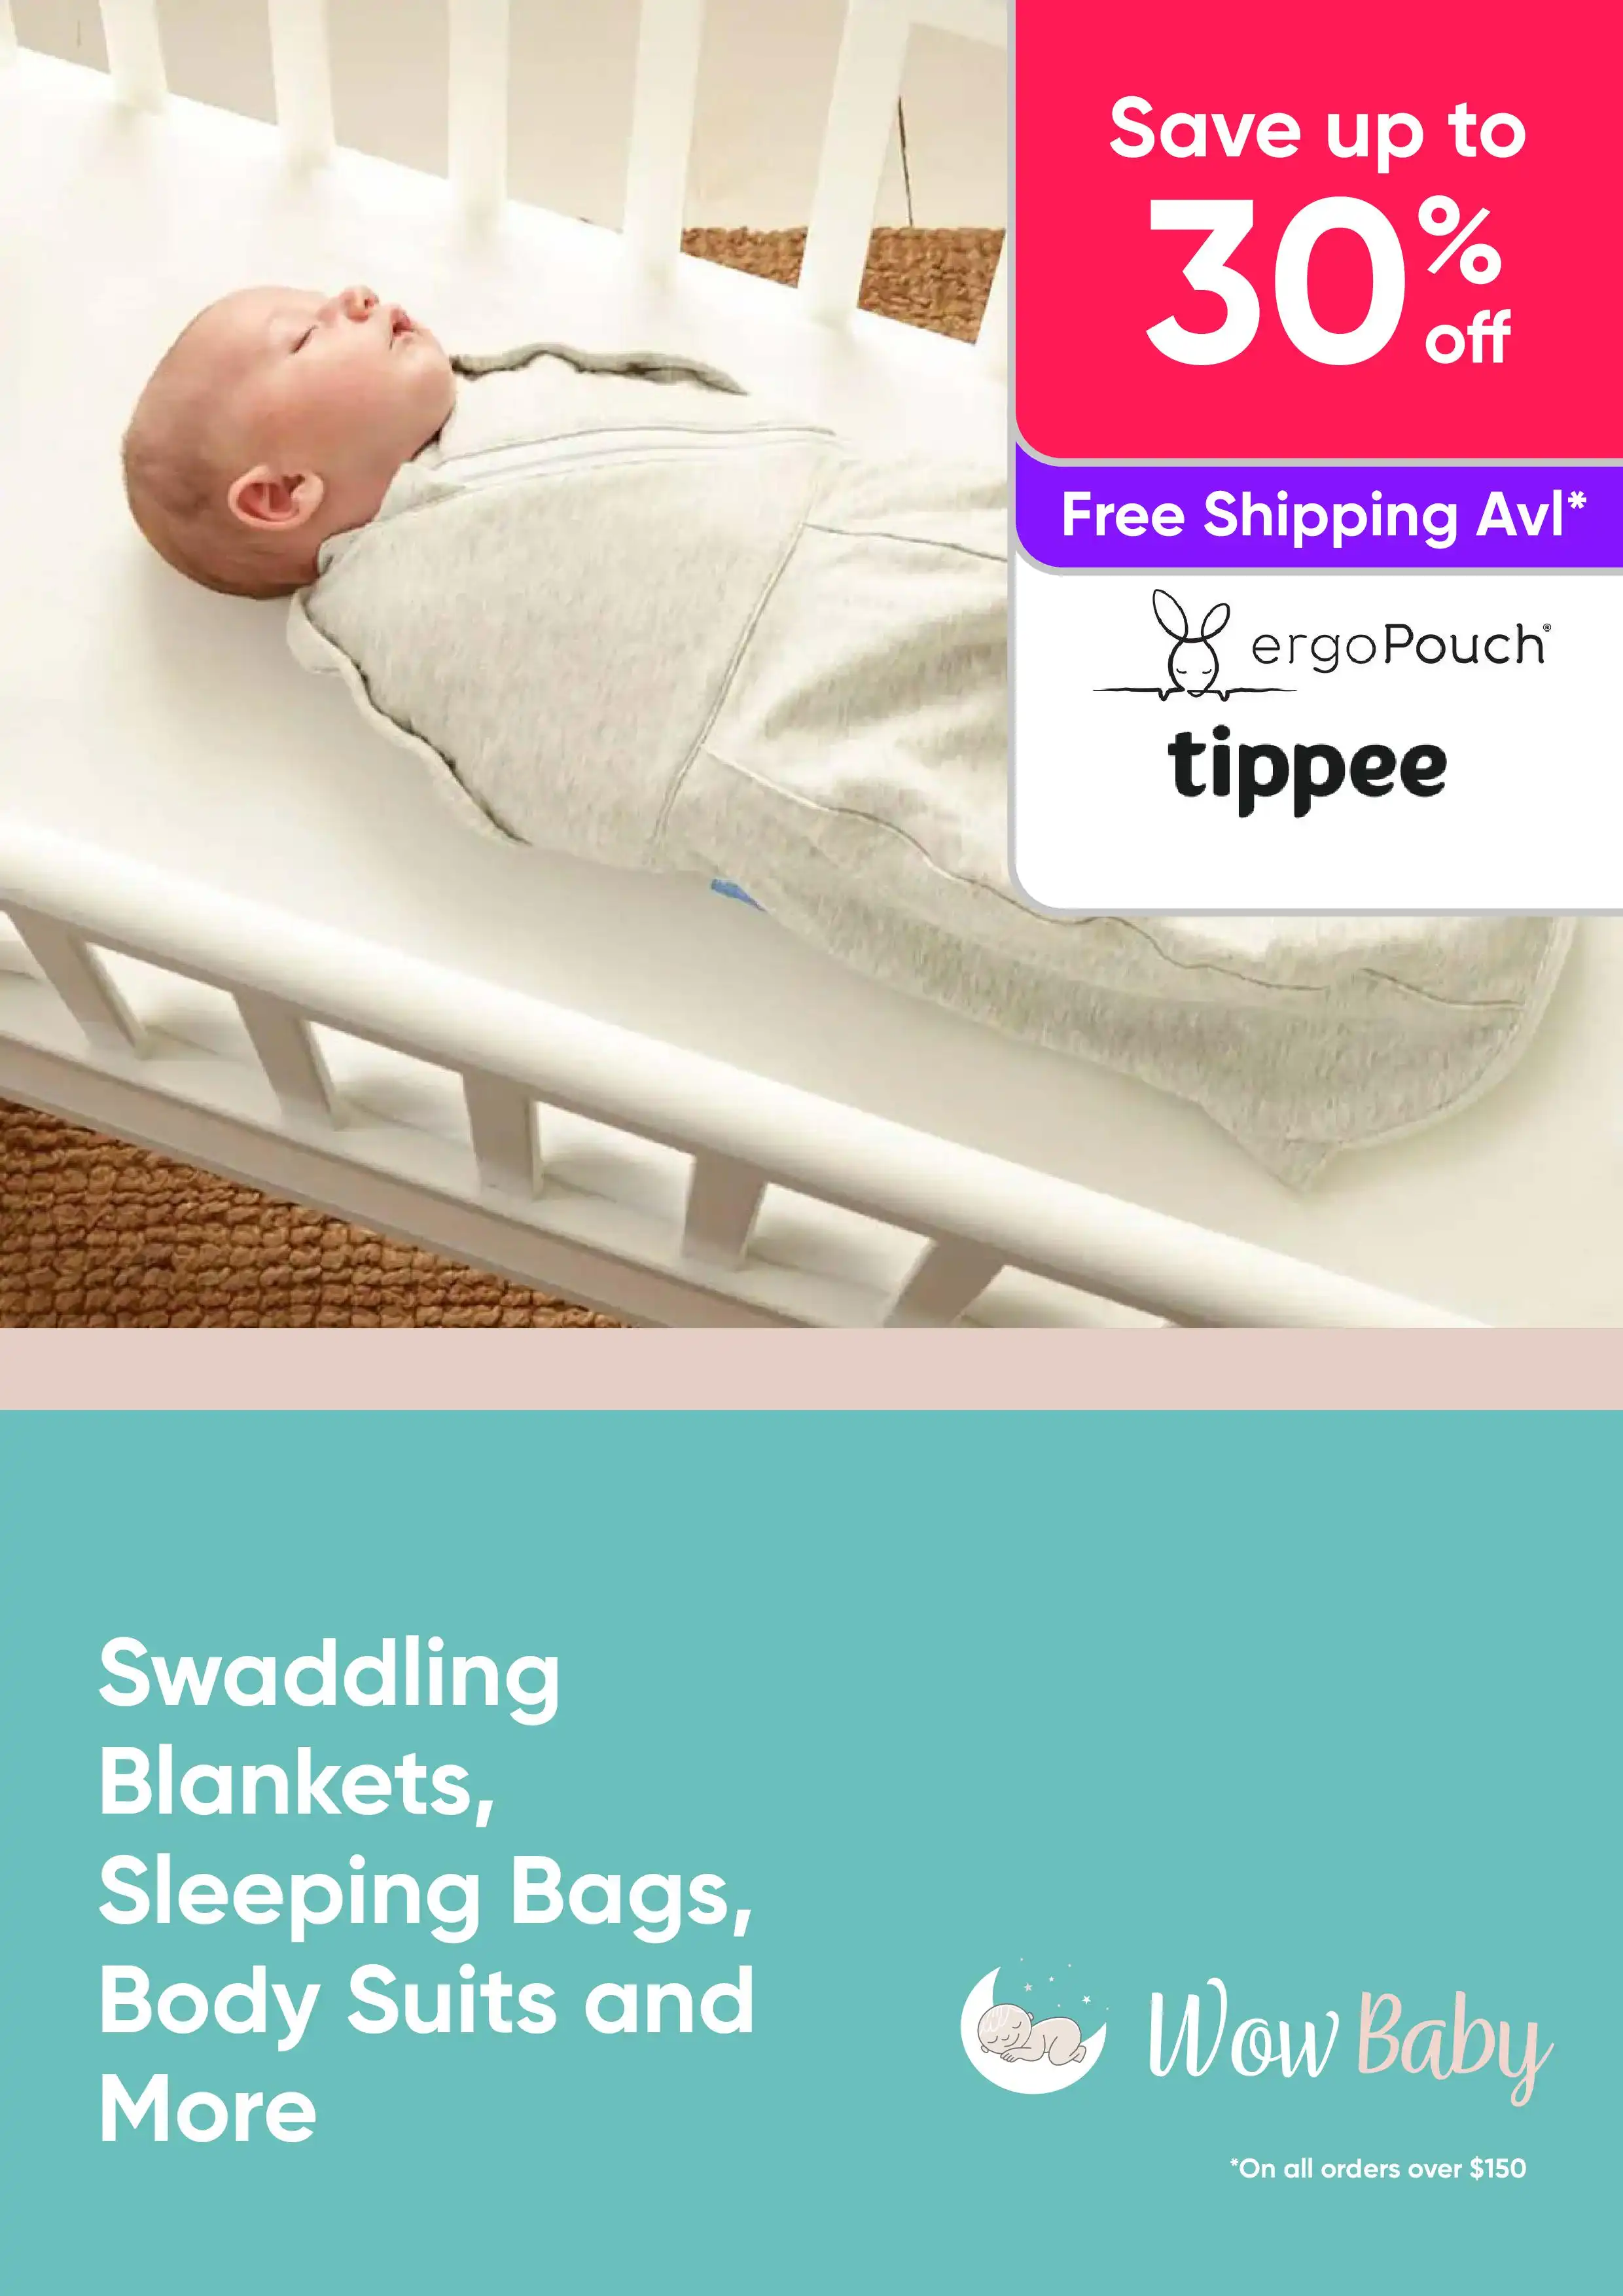 Baby Swaddling Blankets, Sleeping Bags, Body Suits and More - Save up to 30% off